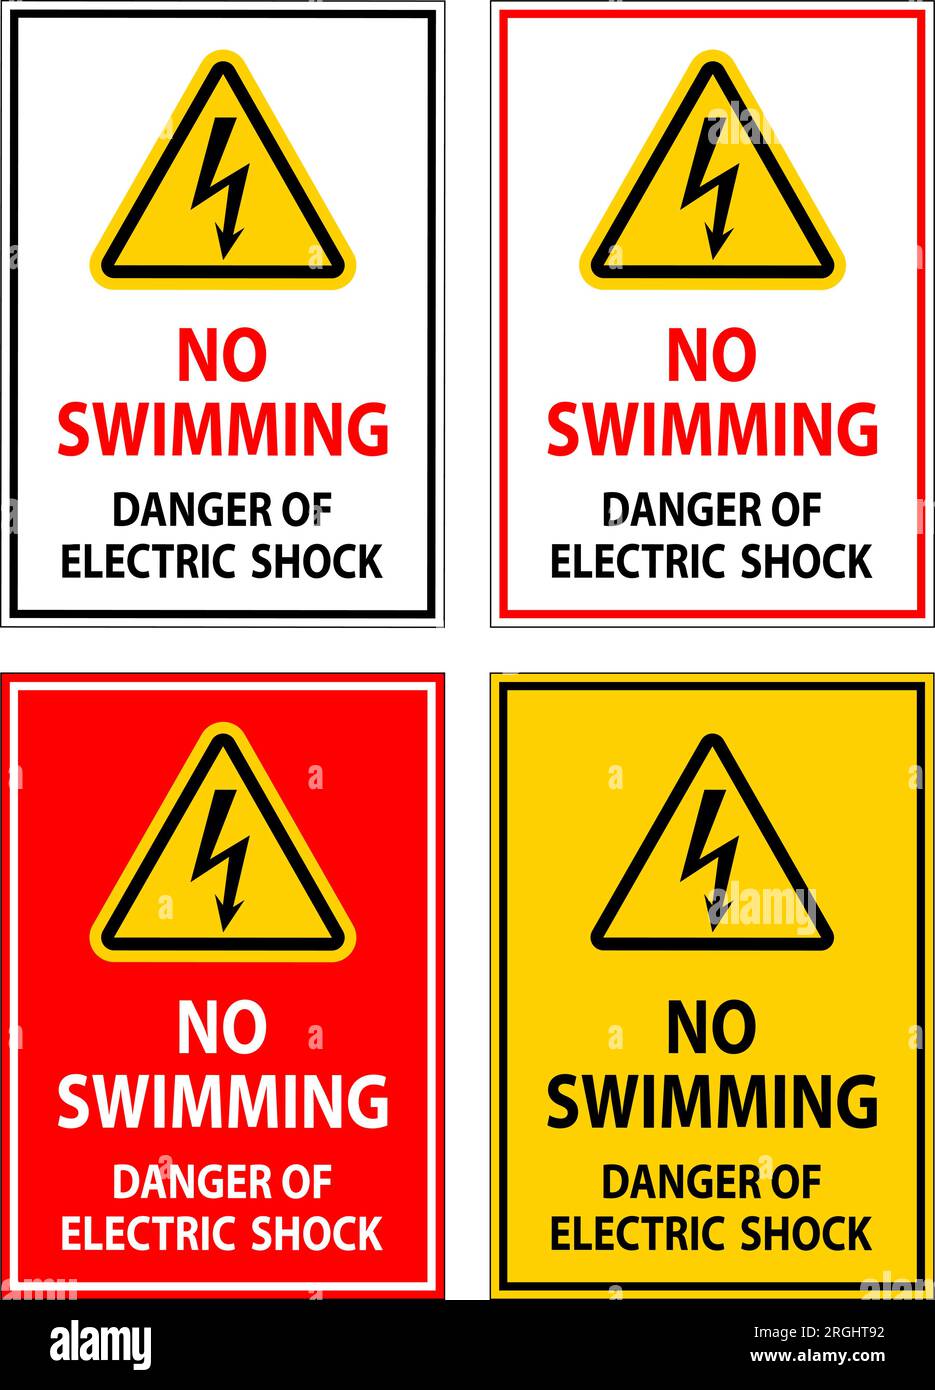 Electrical Hazard Sign No Swimming - Danger Of Electric Shock Stock Vector